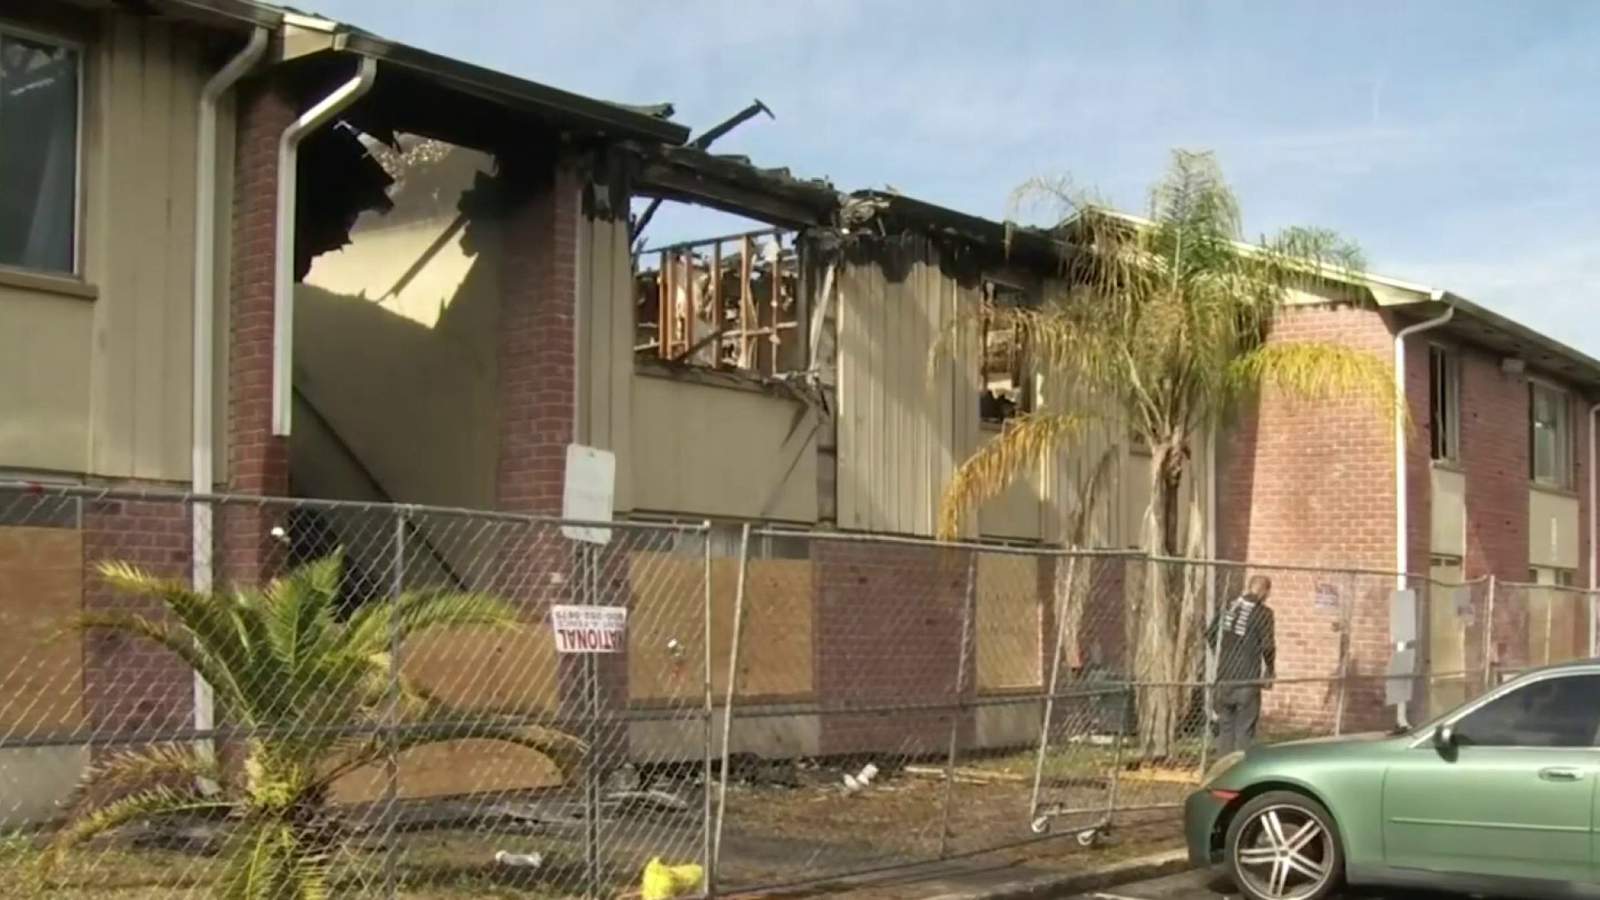 ‘We have nowhere to go:’ Fire at Pine Hills apartment complex leaves residents homeless